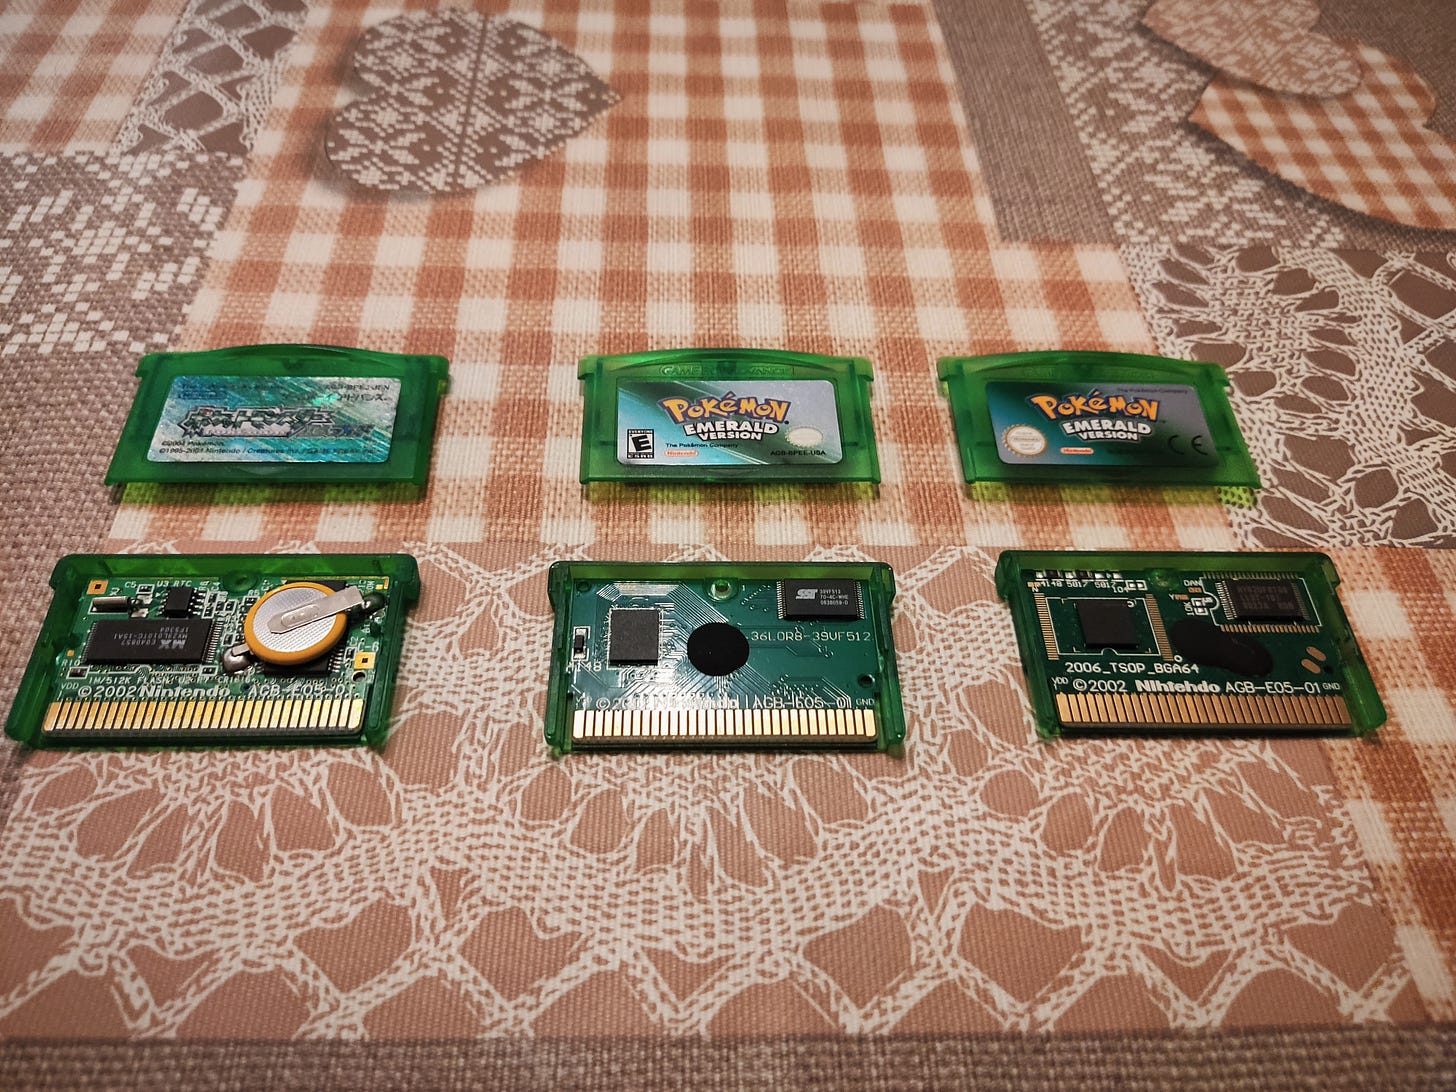 Copies of Pokémon Emerald. Left side is a genuine Japanese copy, centre is a reproduction, right side is also a reproduction (Photo credit: Lucent)